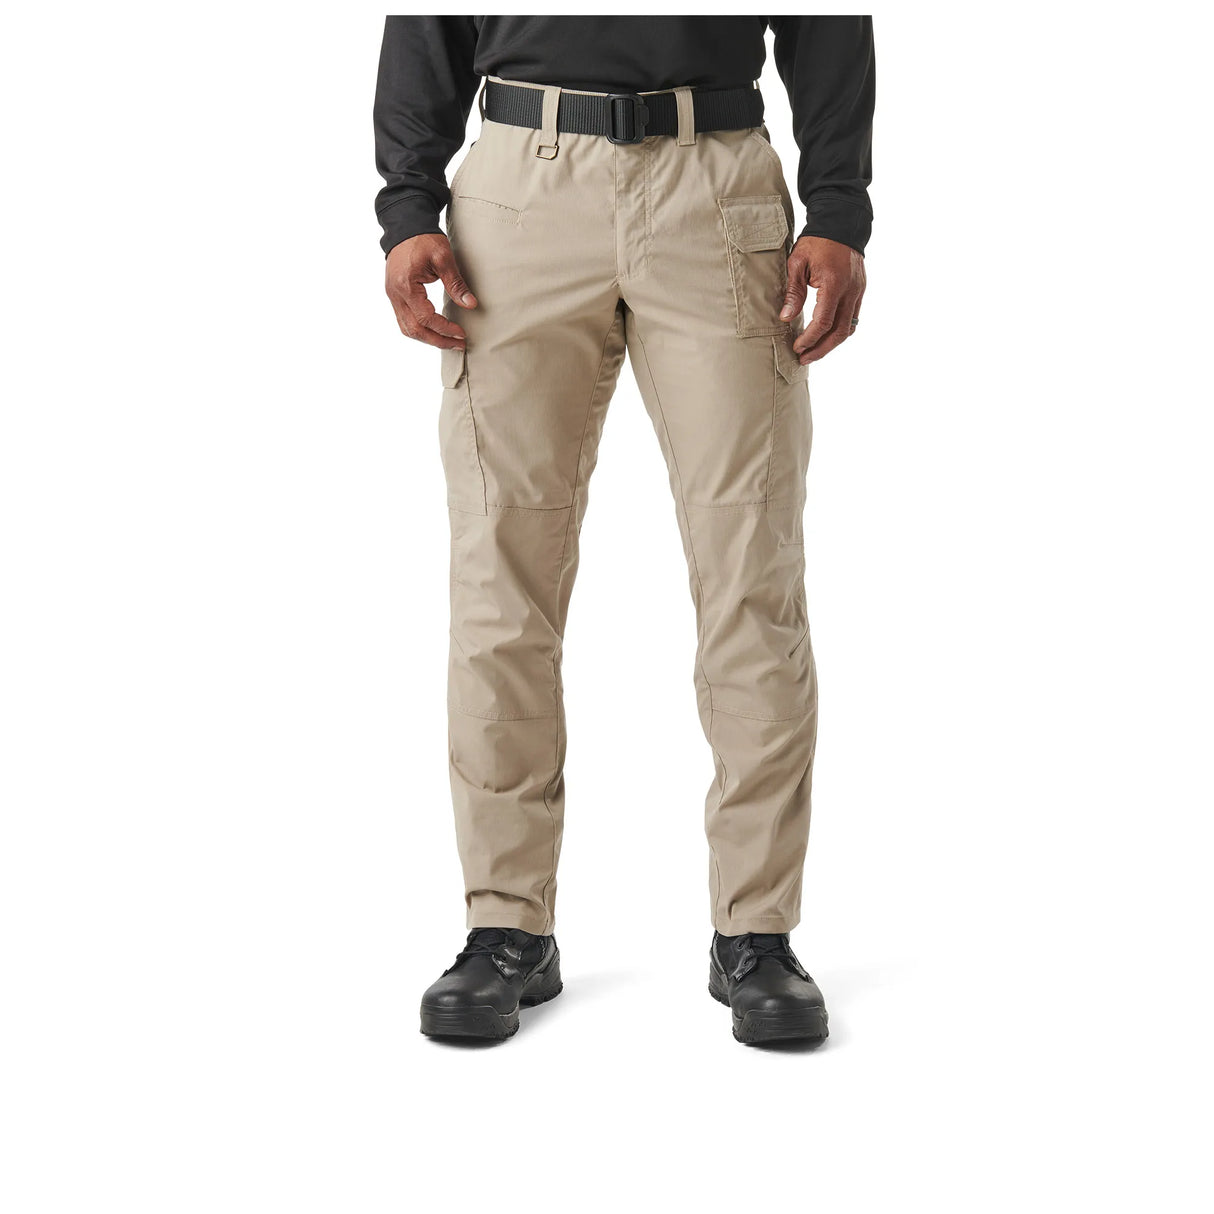 Relaxed Straight-Fit Profile: Provides a comfortable and functional fit for all-day wear.